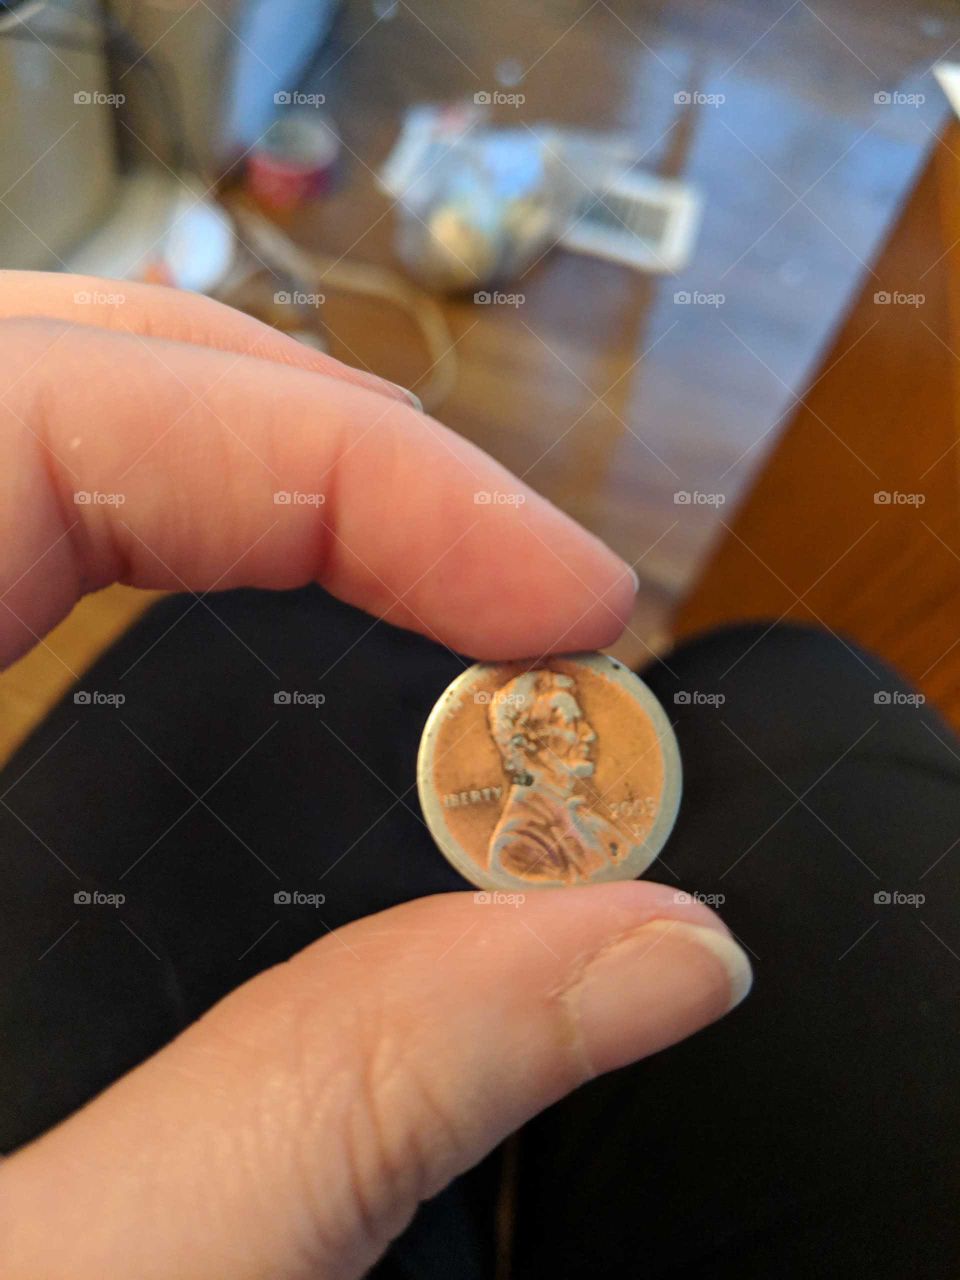 found a penny that had been rubbed down a lot so the inside metal showed